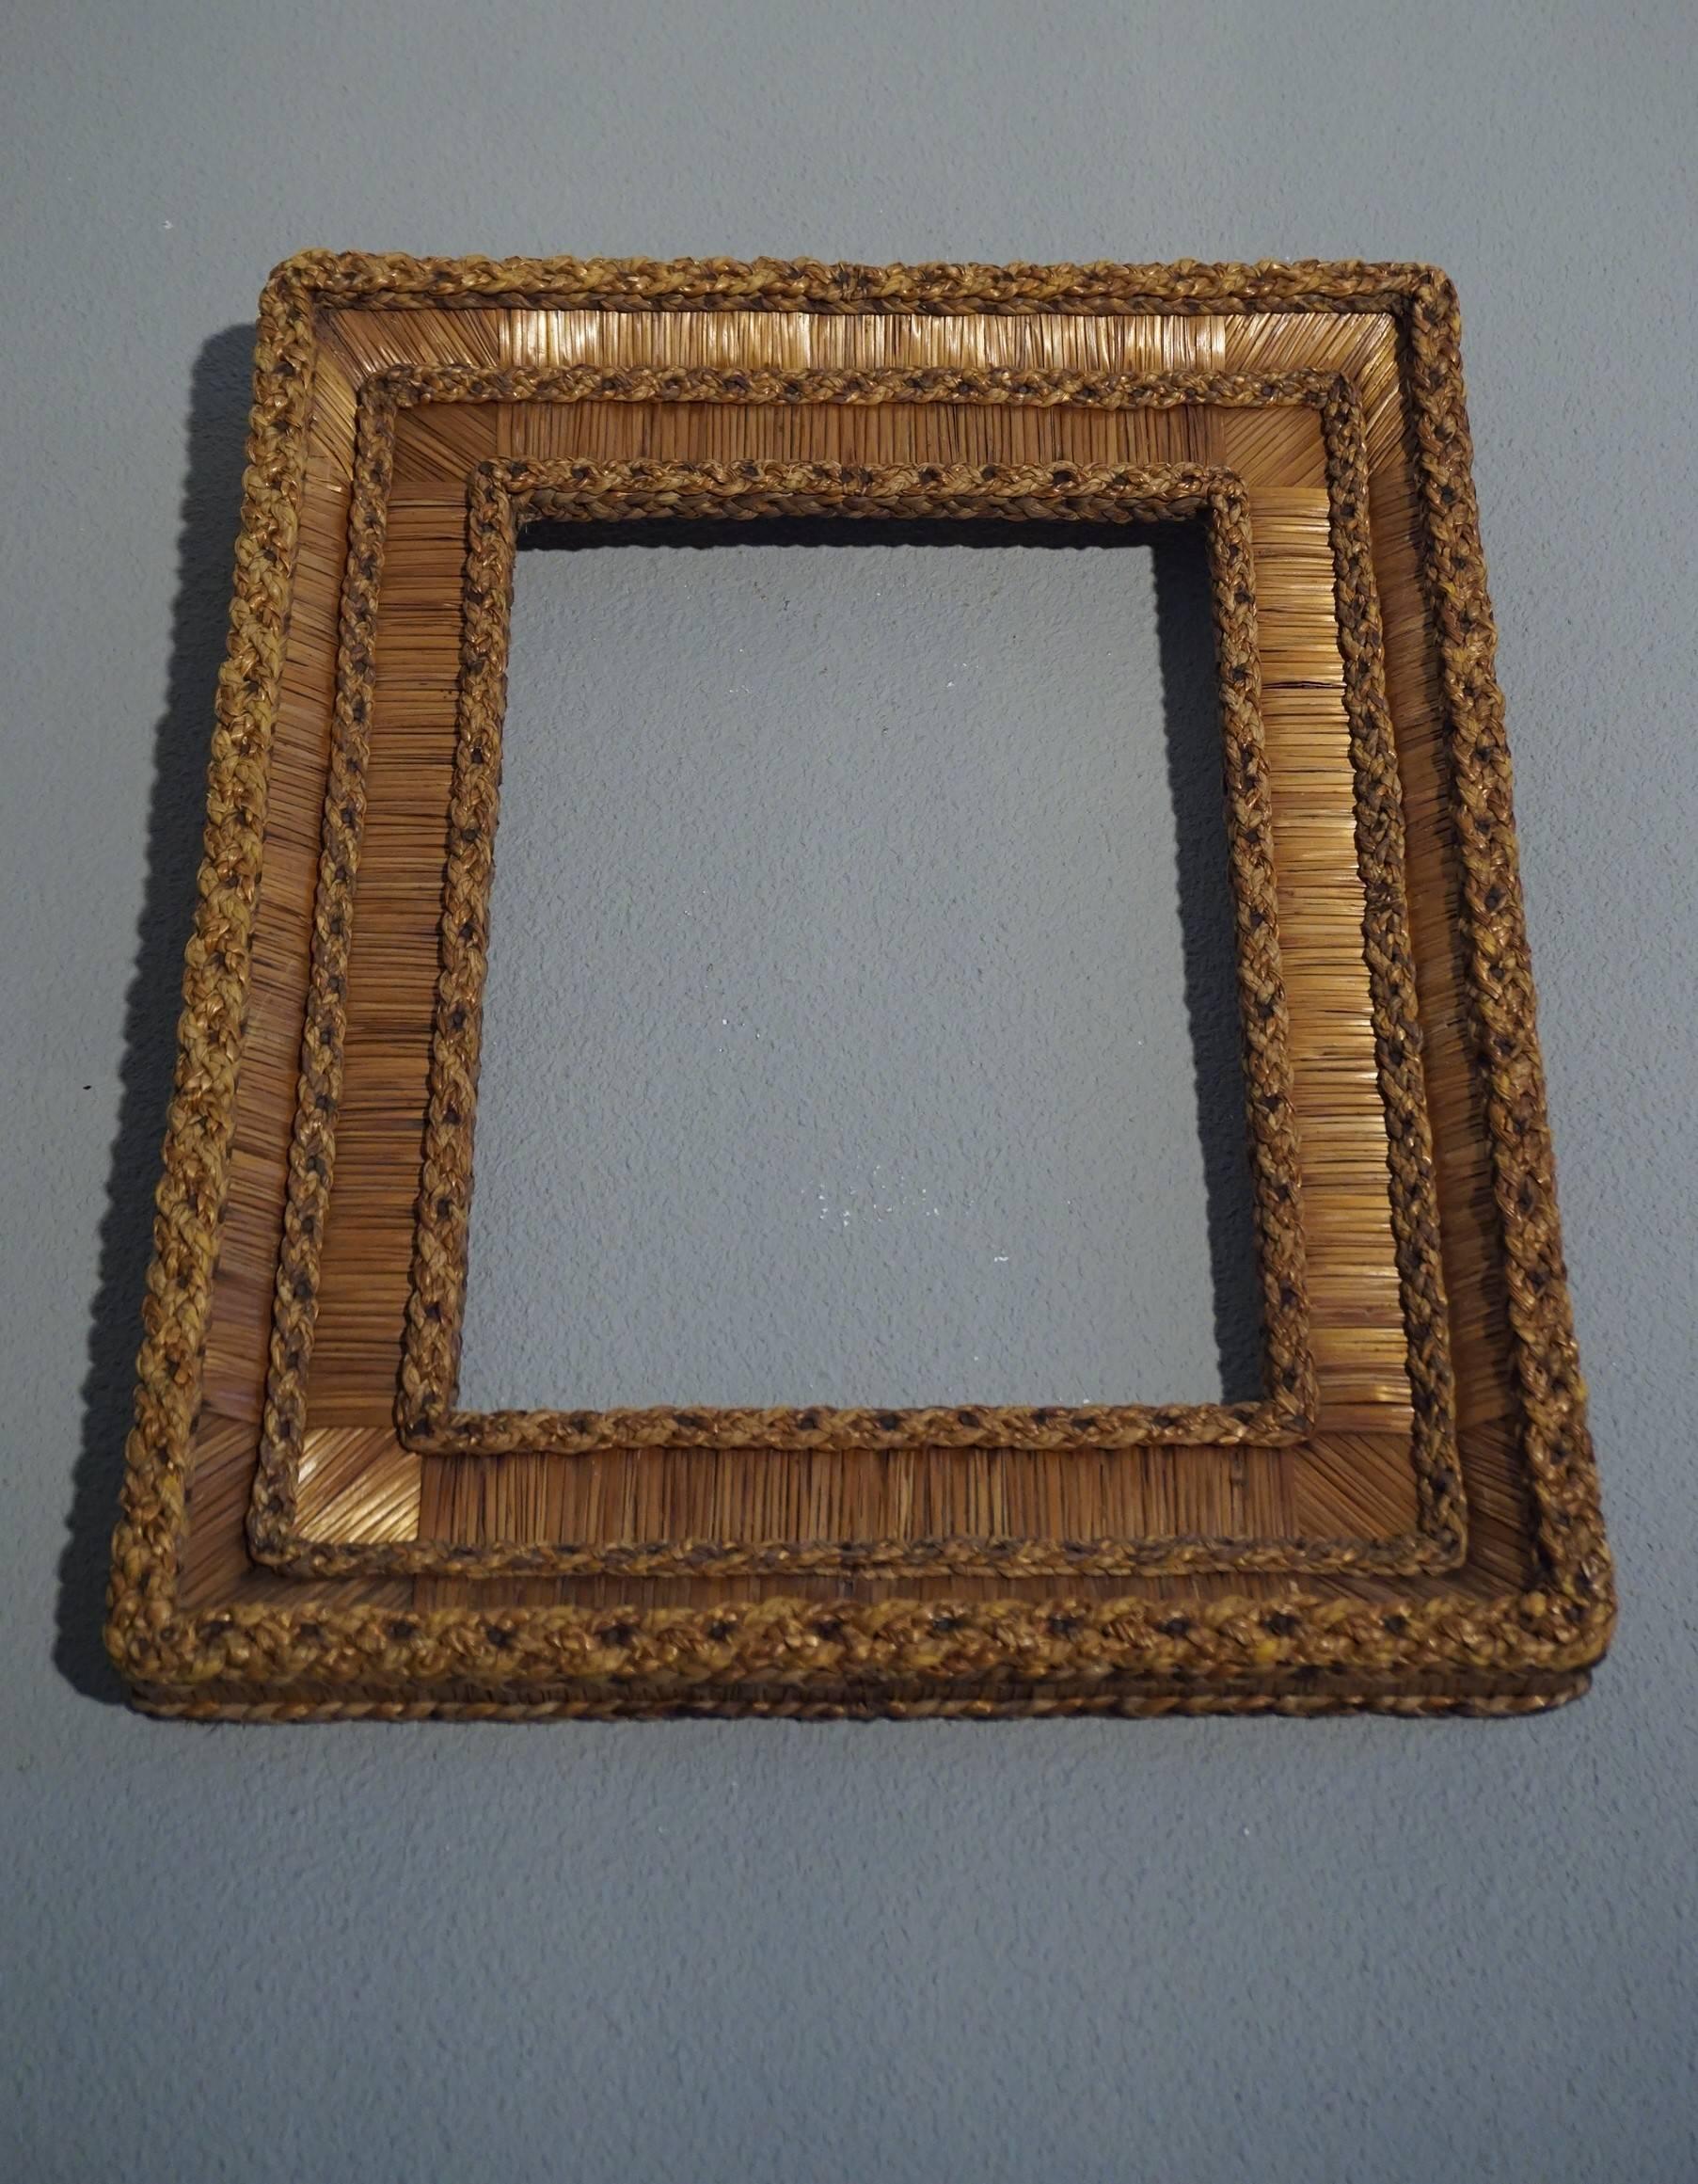 Vintage Hand-Woven Straw on Wood, Stylishly Organic Picture or Mirror Frame  4